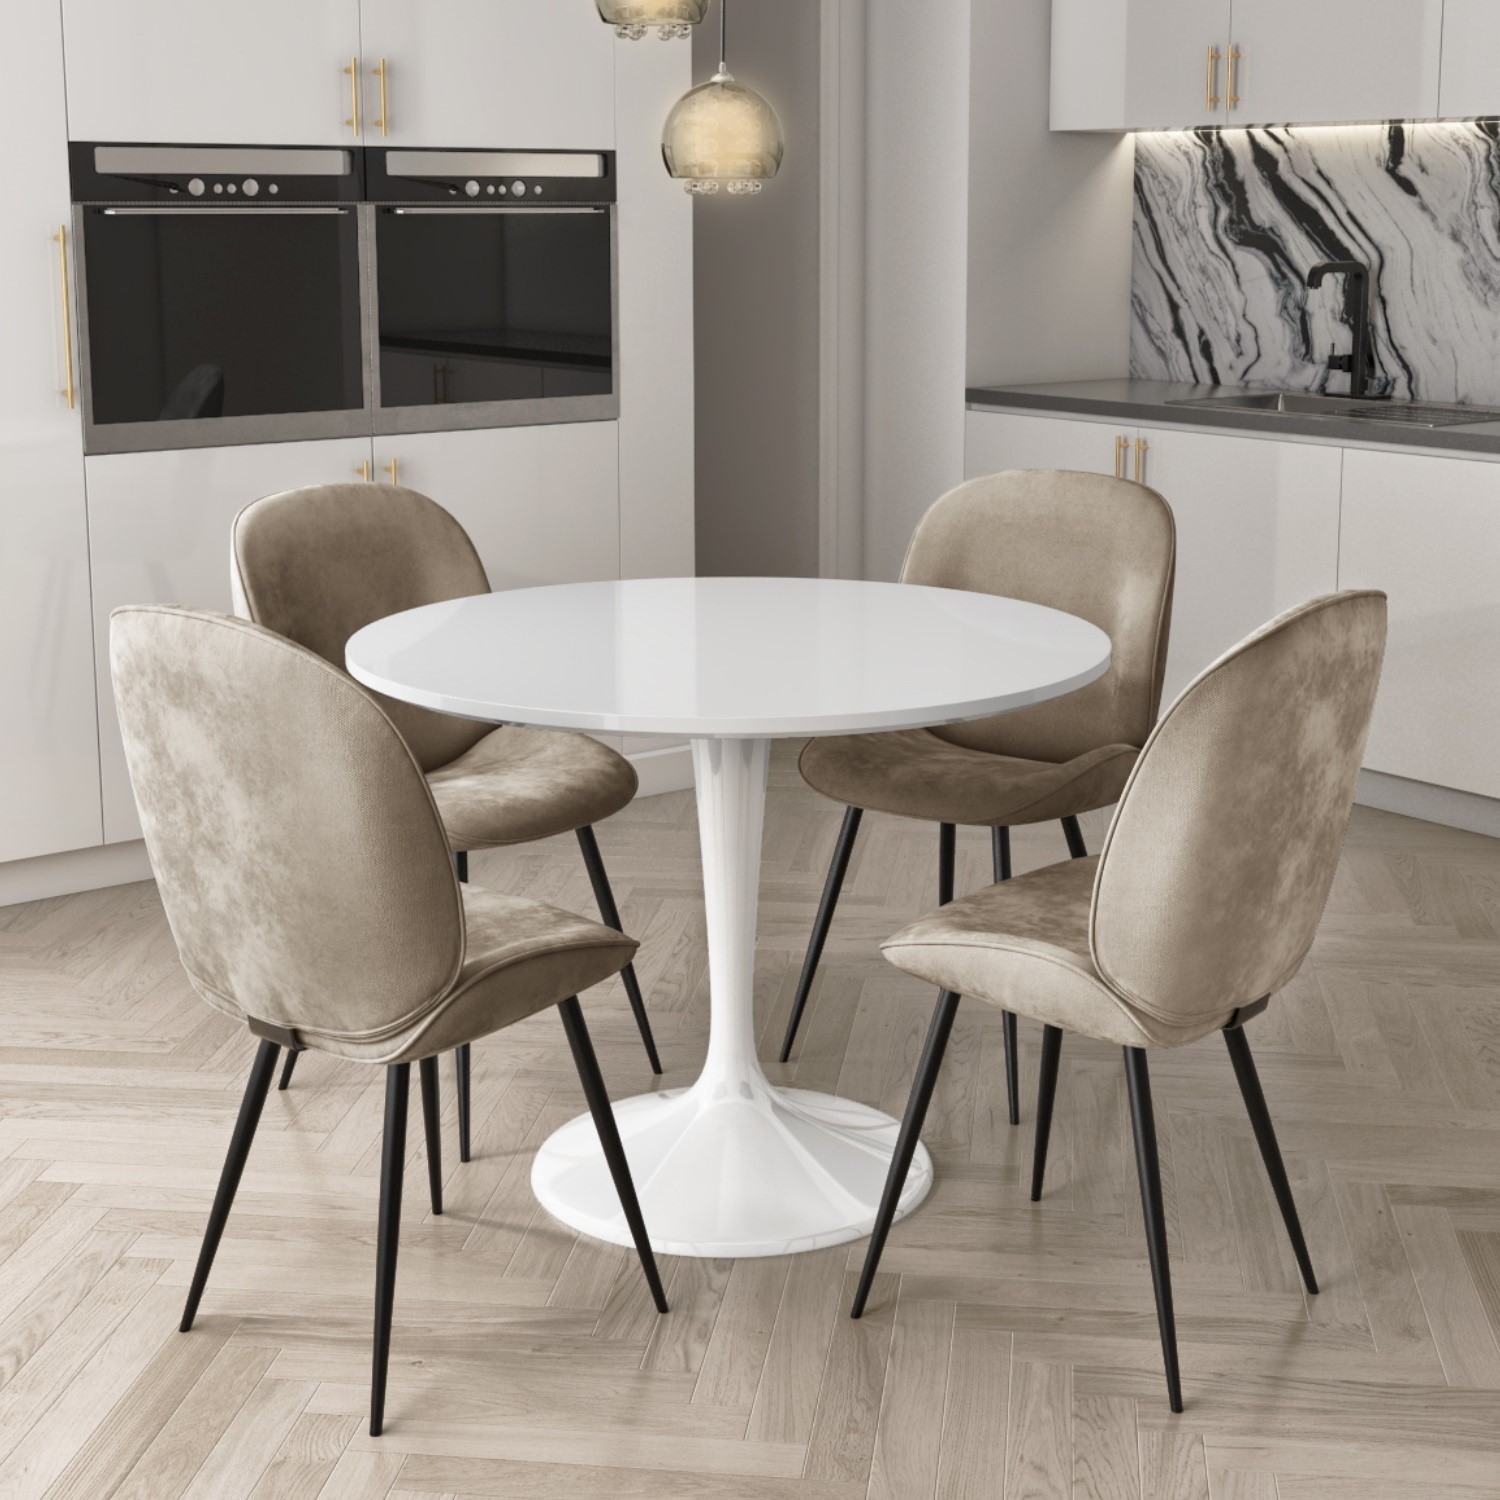 White Round High Gloss Dining Table, White High Gloss Round Dining Table And Chairs